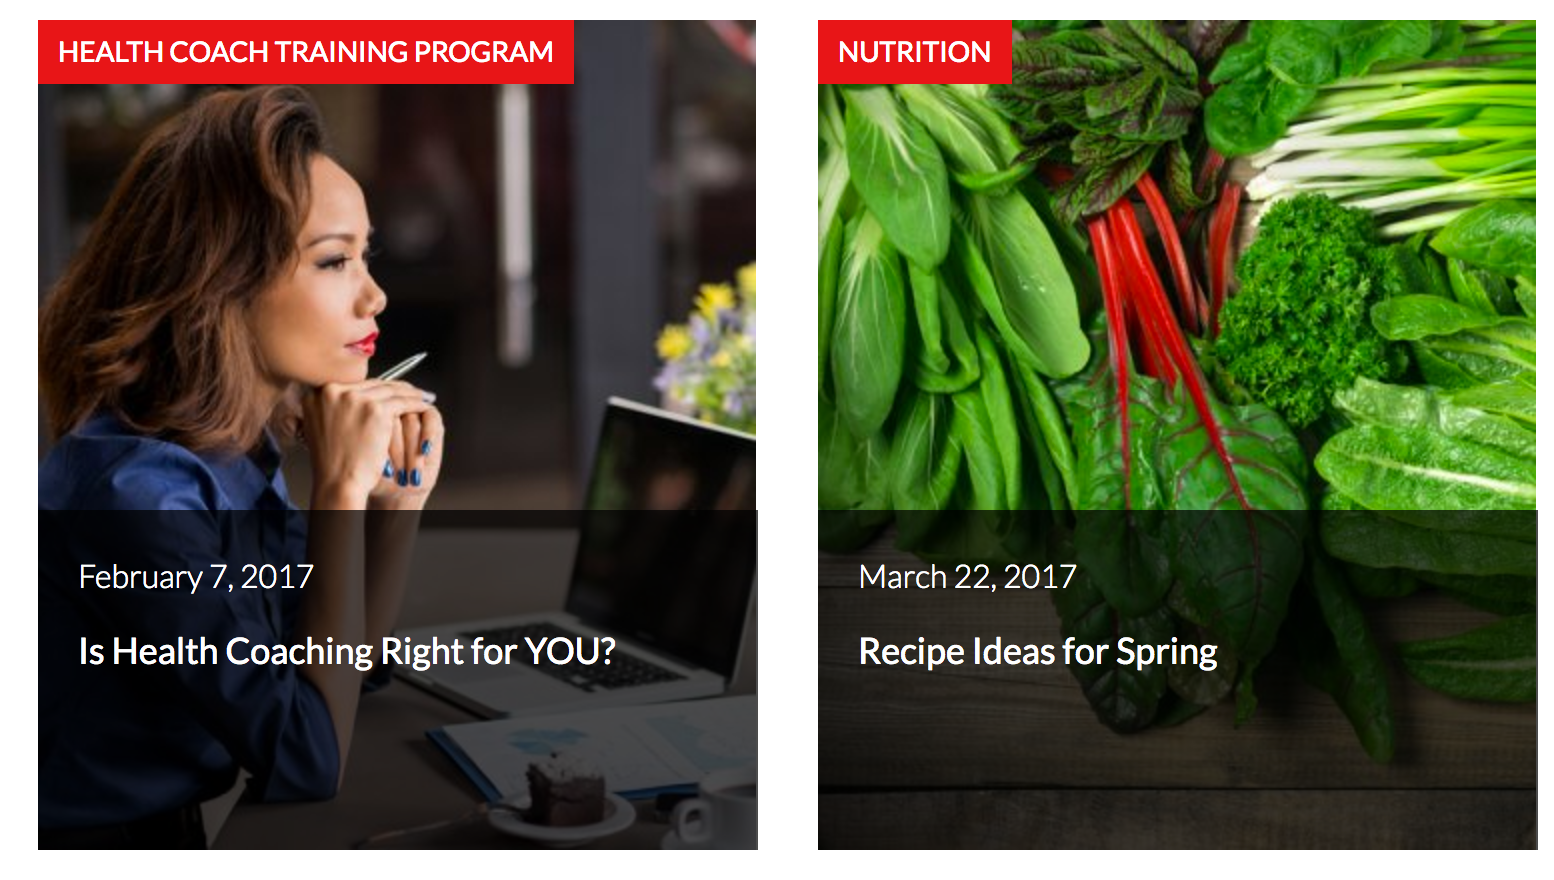 The Institute for Integrative Nutrition's blog is filled with helpful resources for entrepreneurs looking to make a move into health coaching